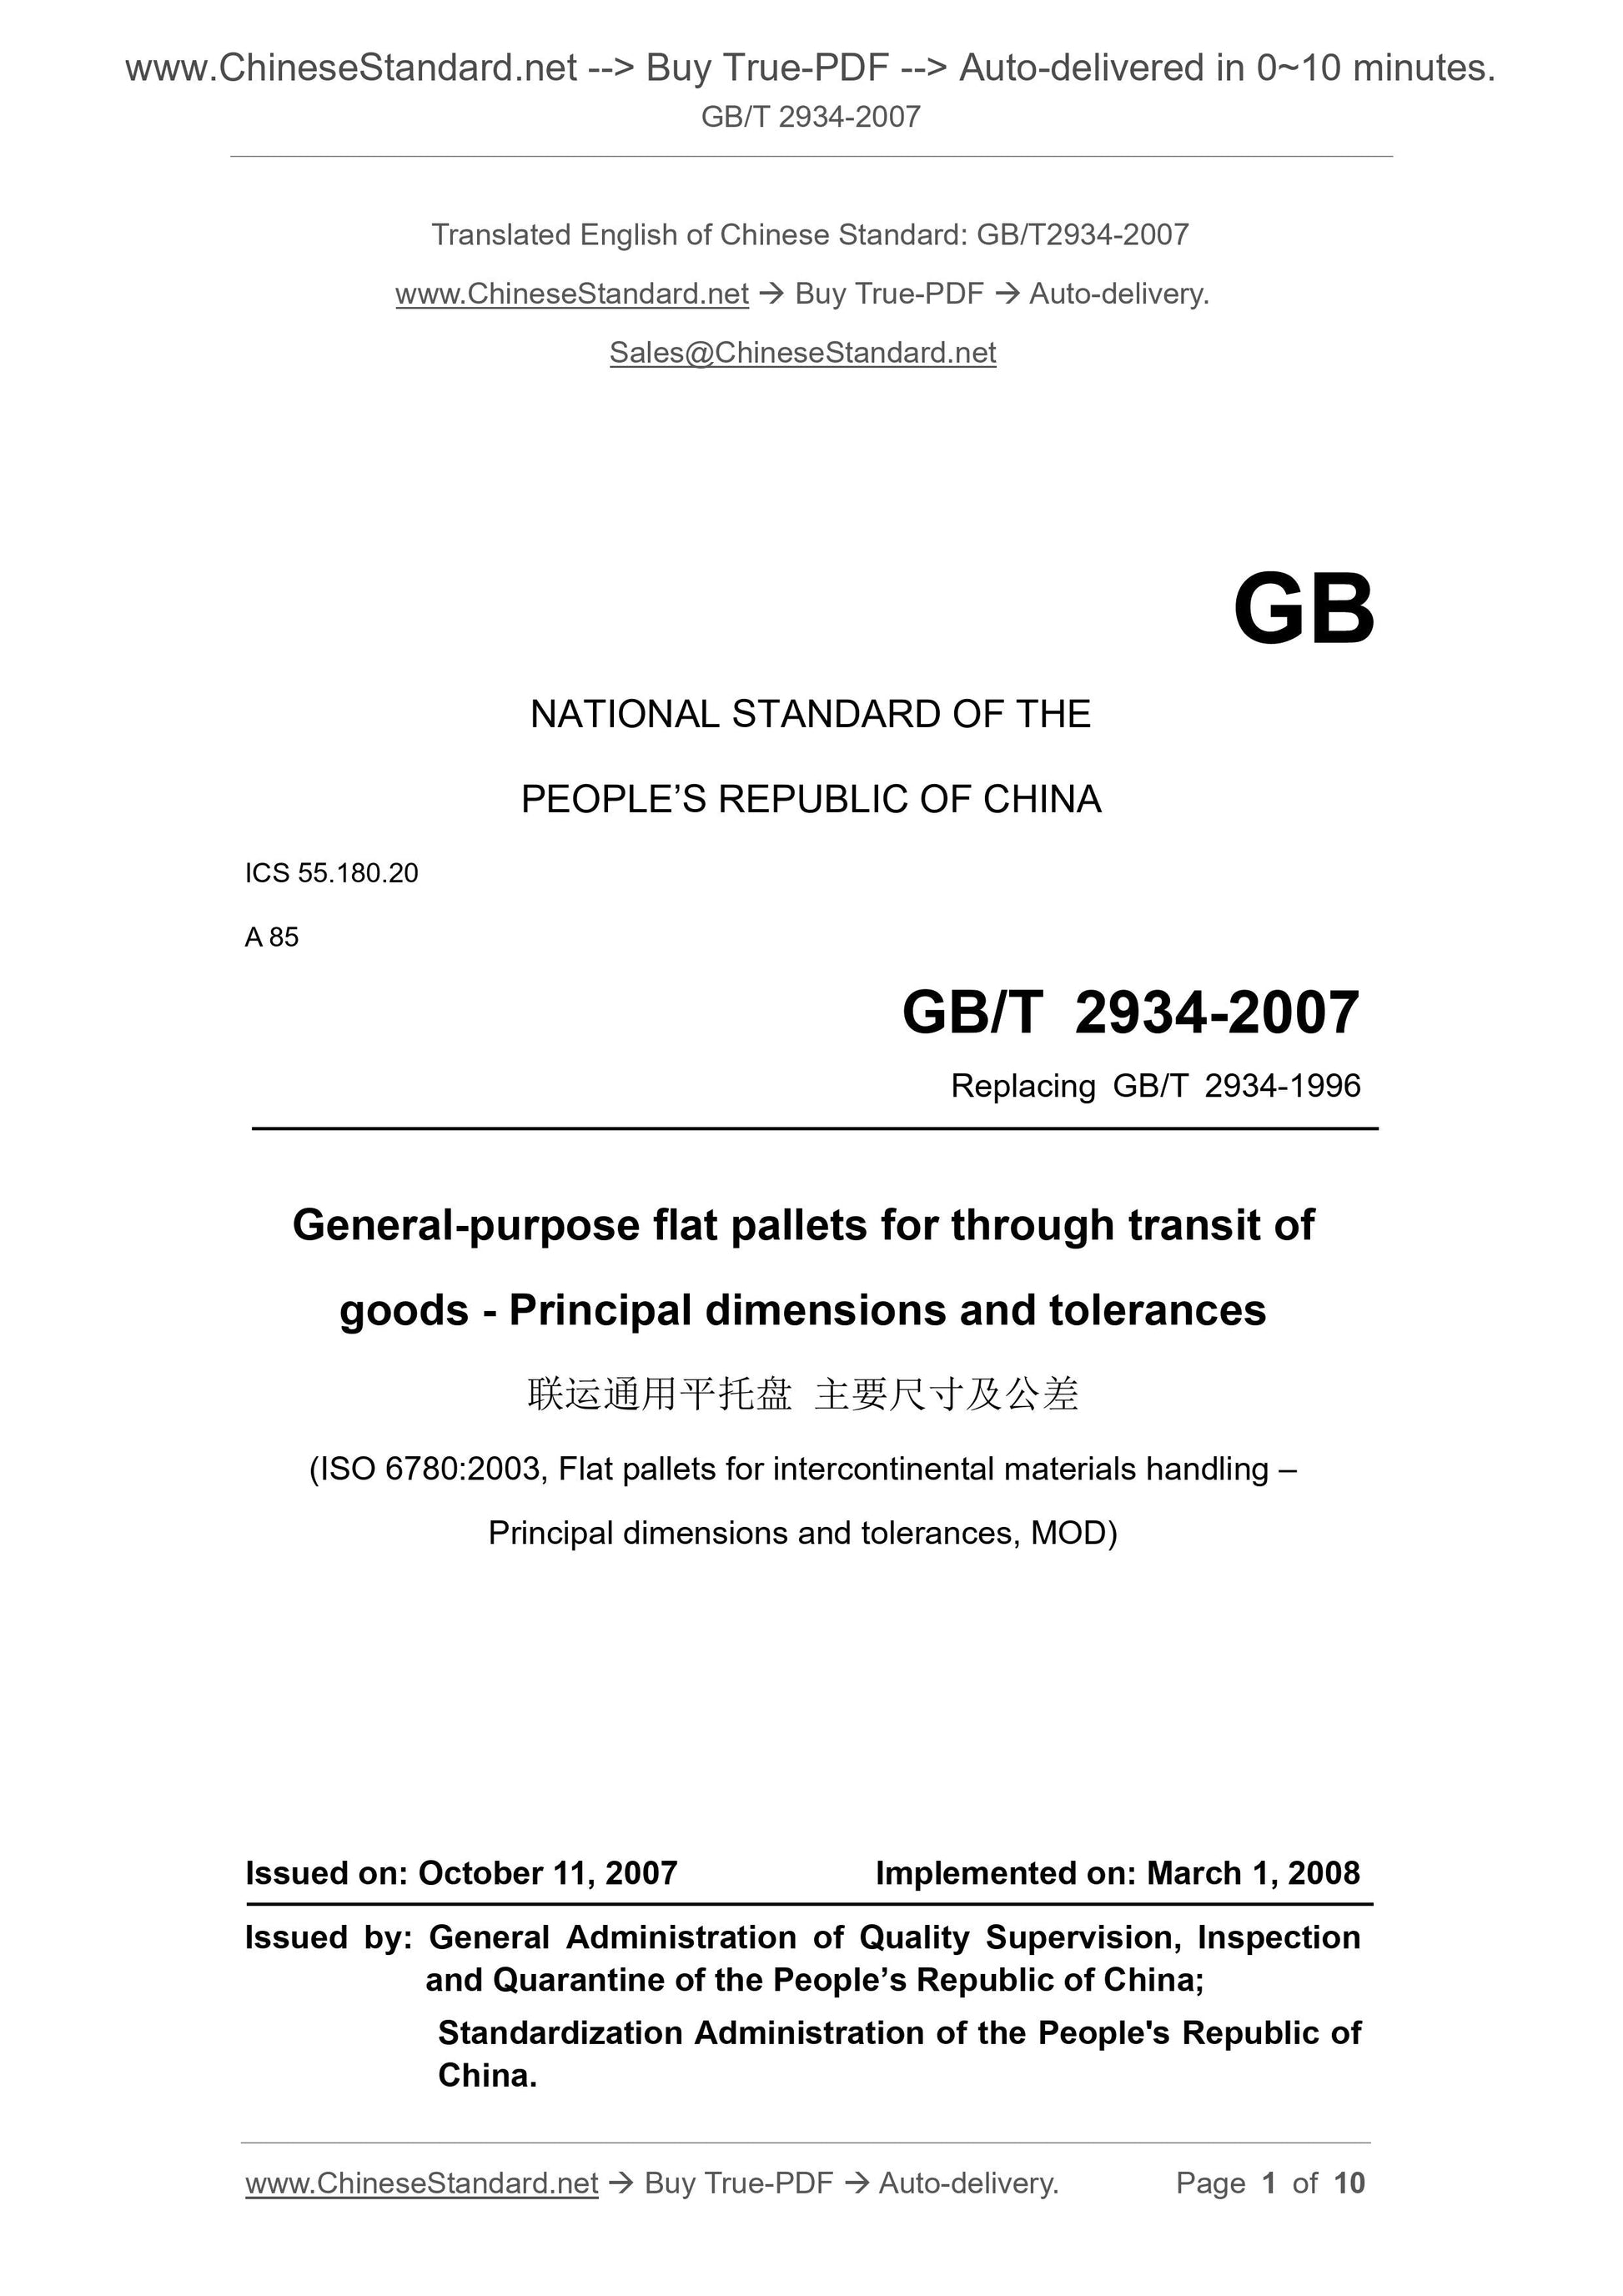 GB/T 2934-2007 Page 1